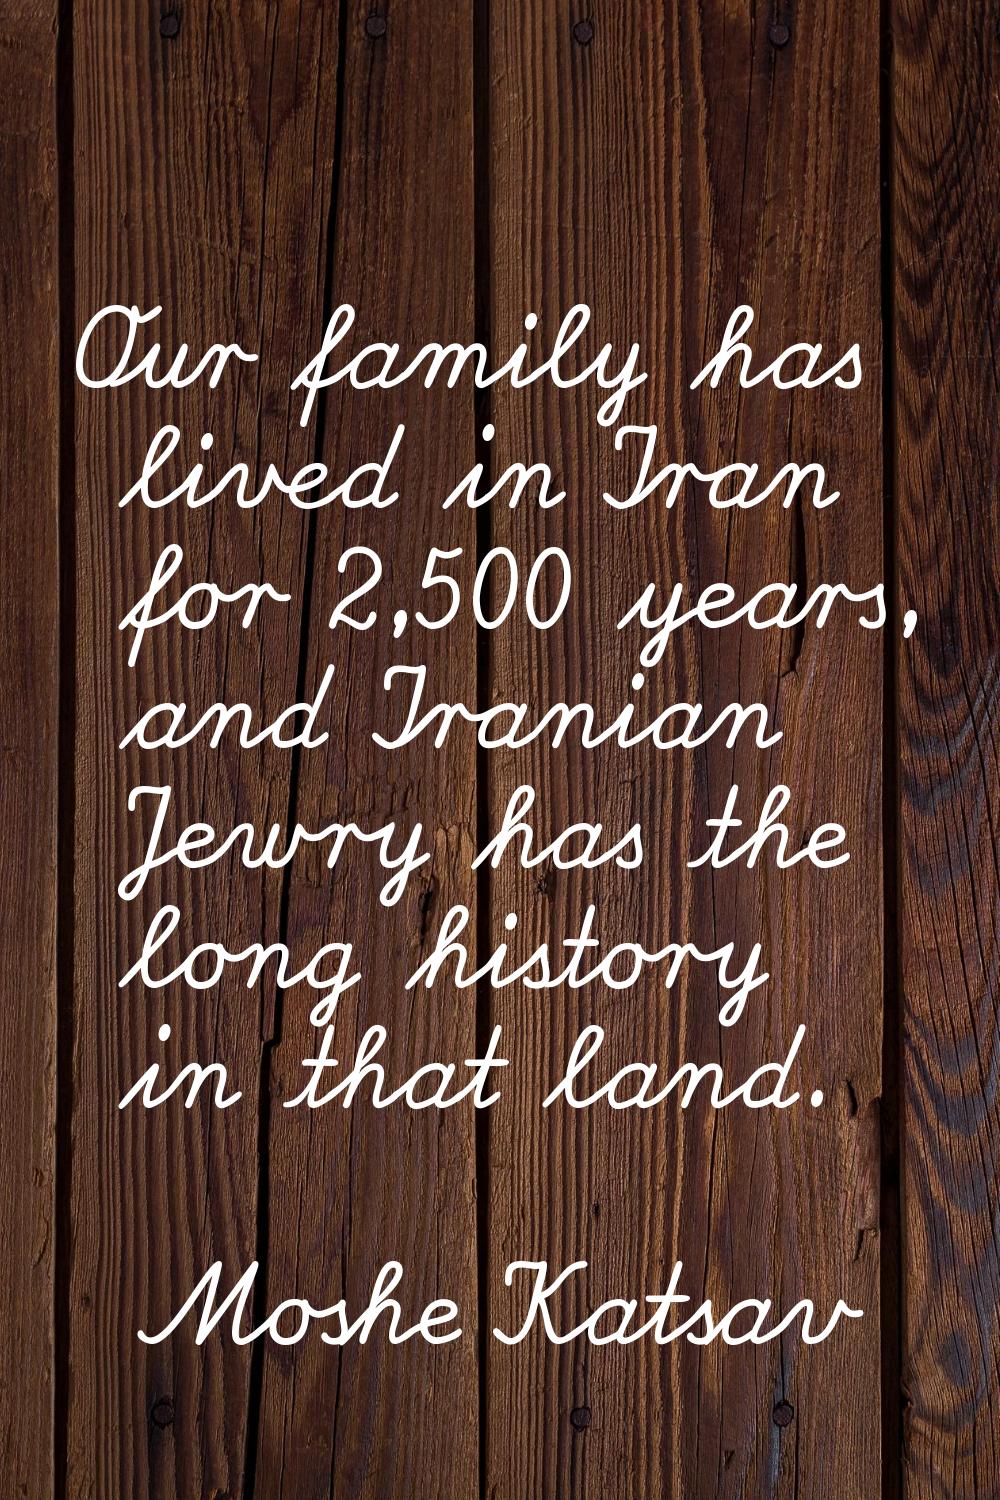 Our family has lived in Iran for 2,500 years, and Iranian Jewry has the long history in that land.